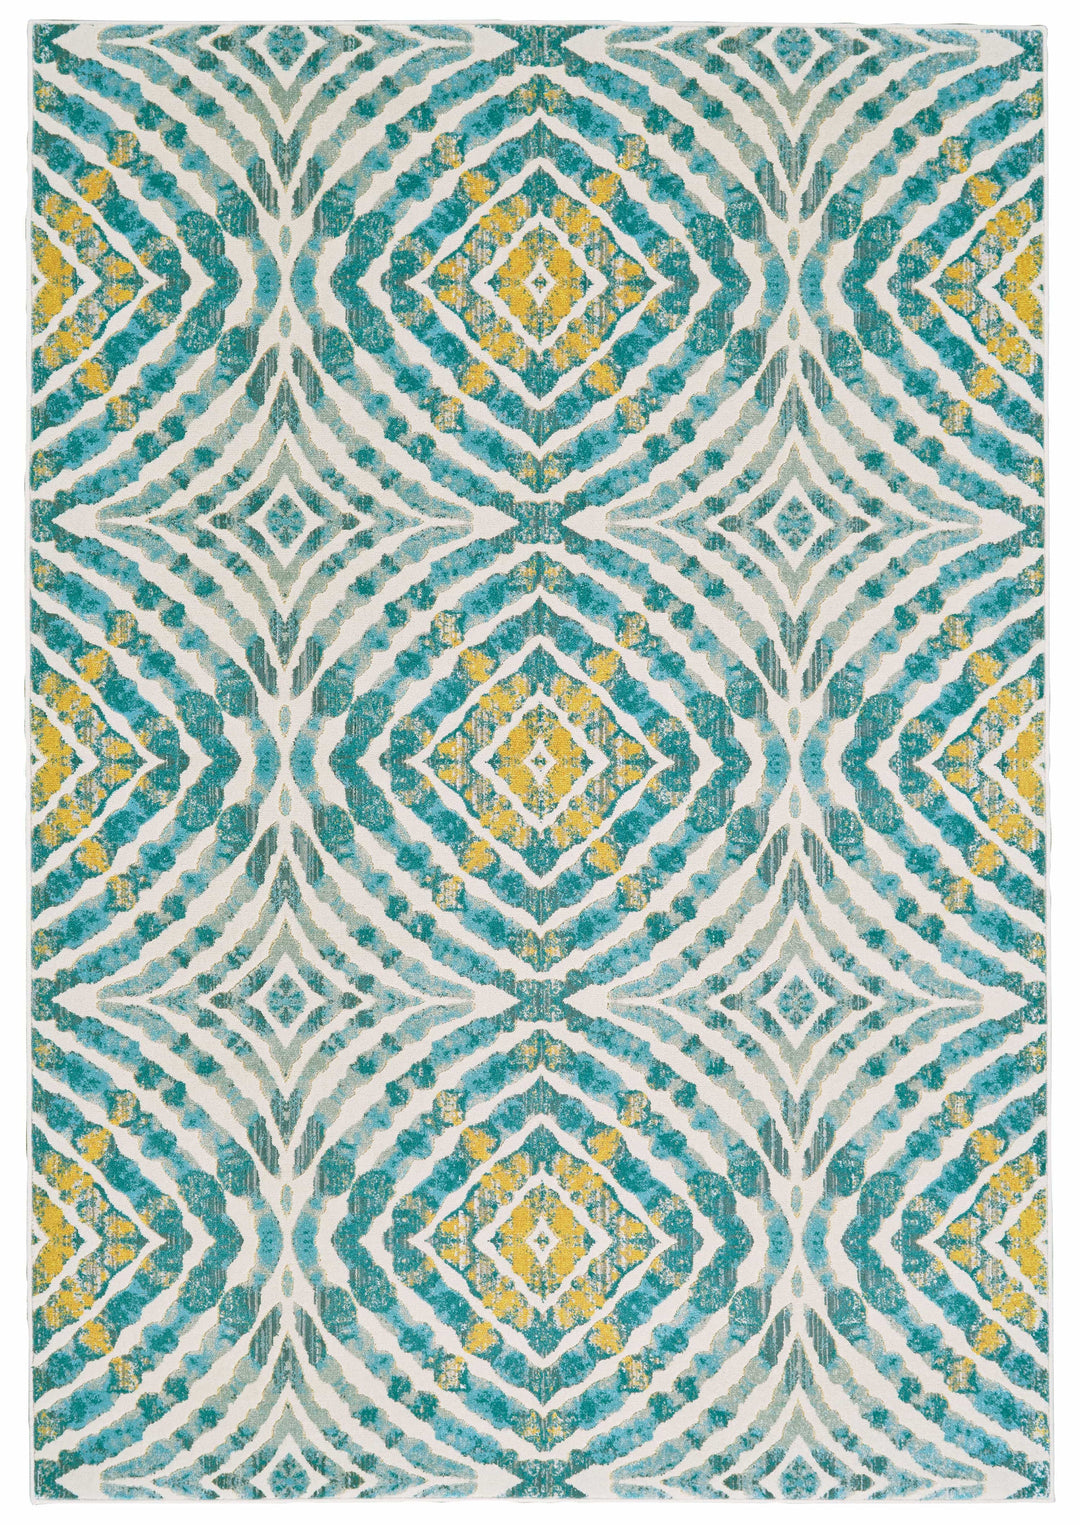 Feizy Feizy Keats Abstract Ikat Print Rug - Available in 8 Sizes - Teal Blue & Golden 2'-2" x 4' 6523469FTEL000A22